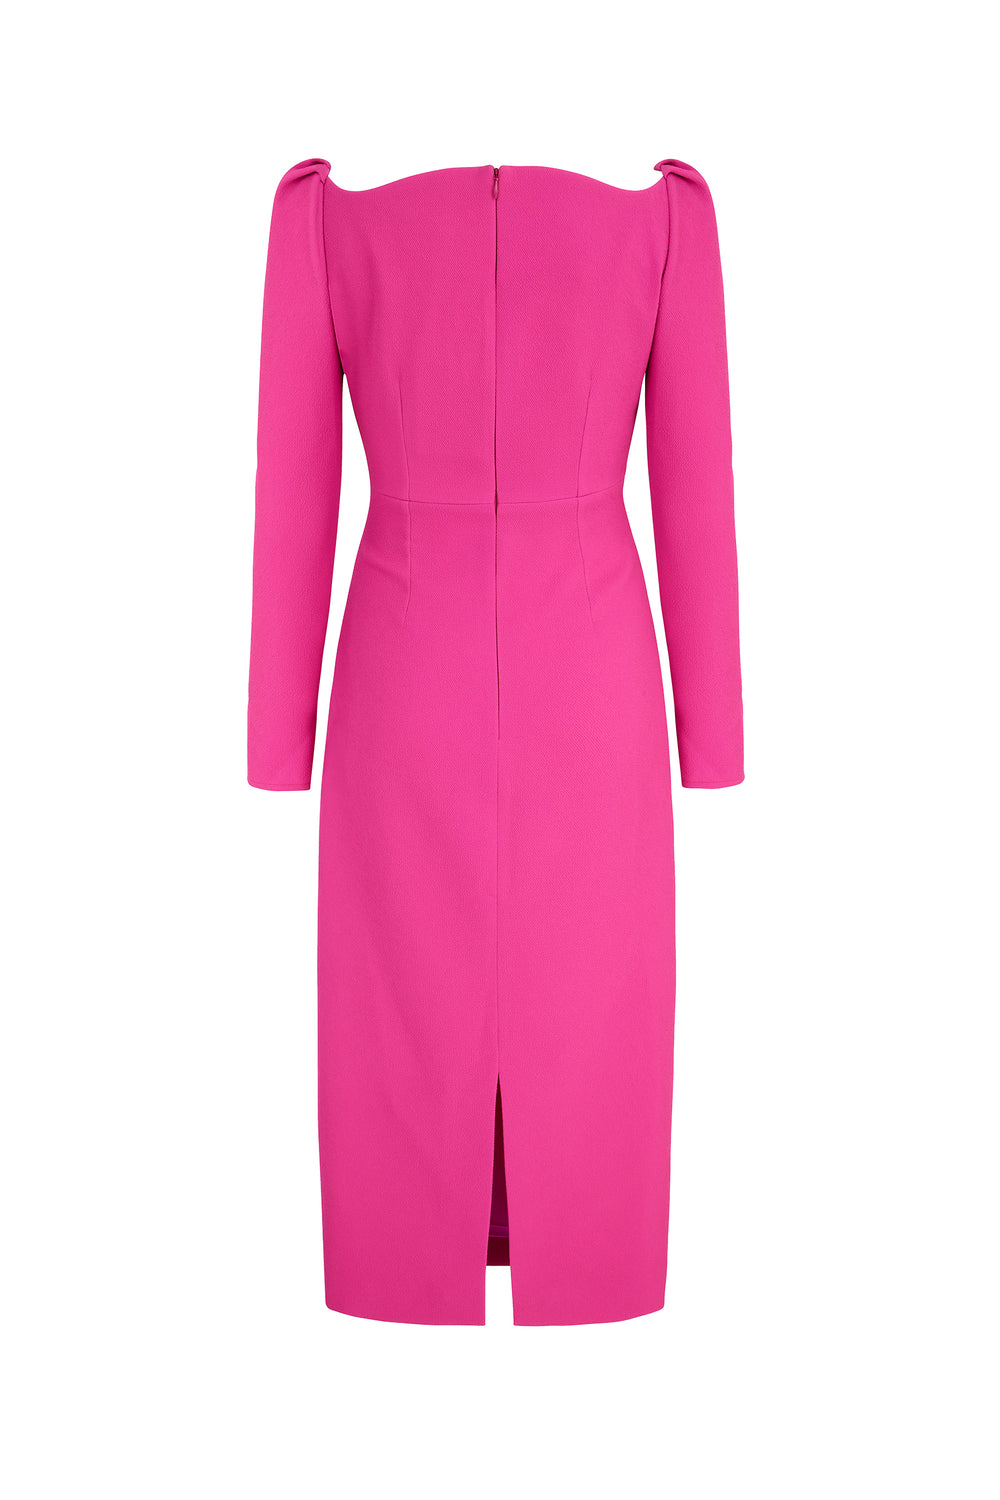 London Hot Stretch Dress Halley | Suzannah | Pink Crepe